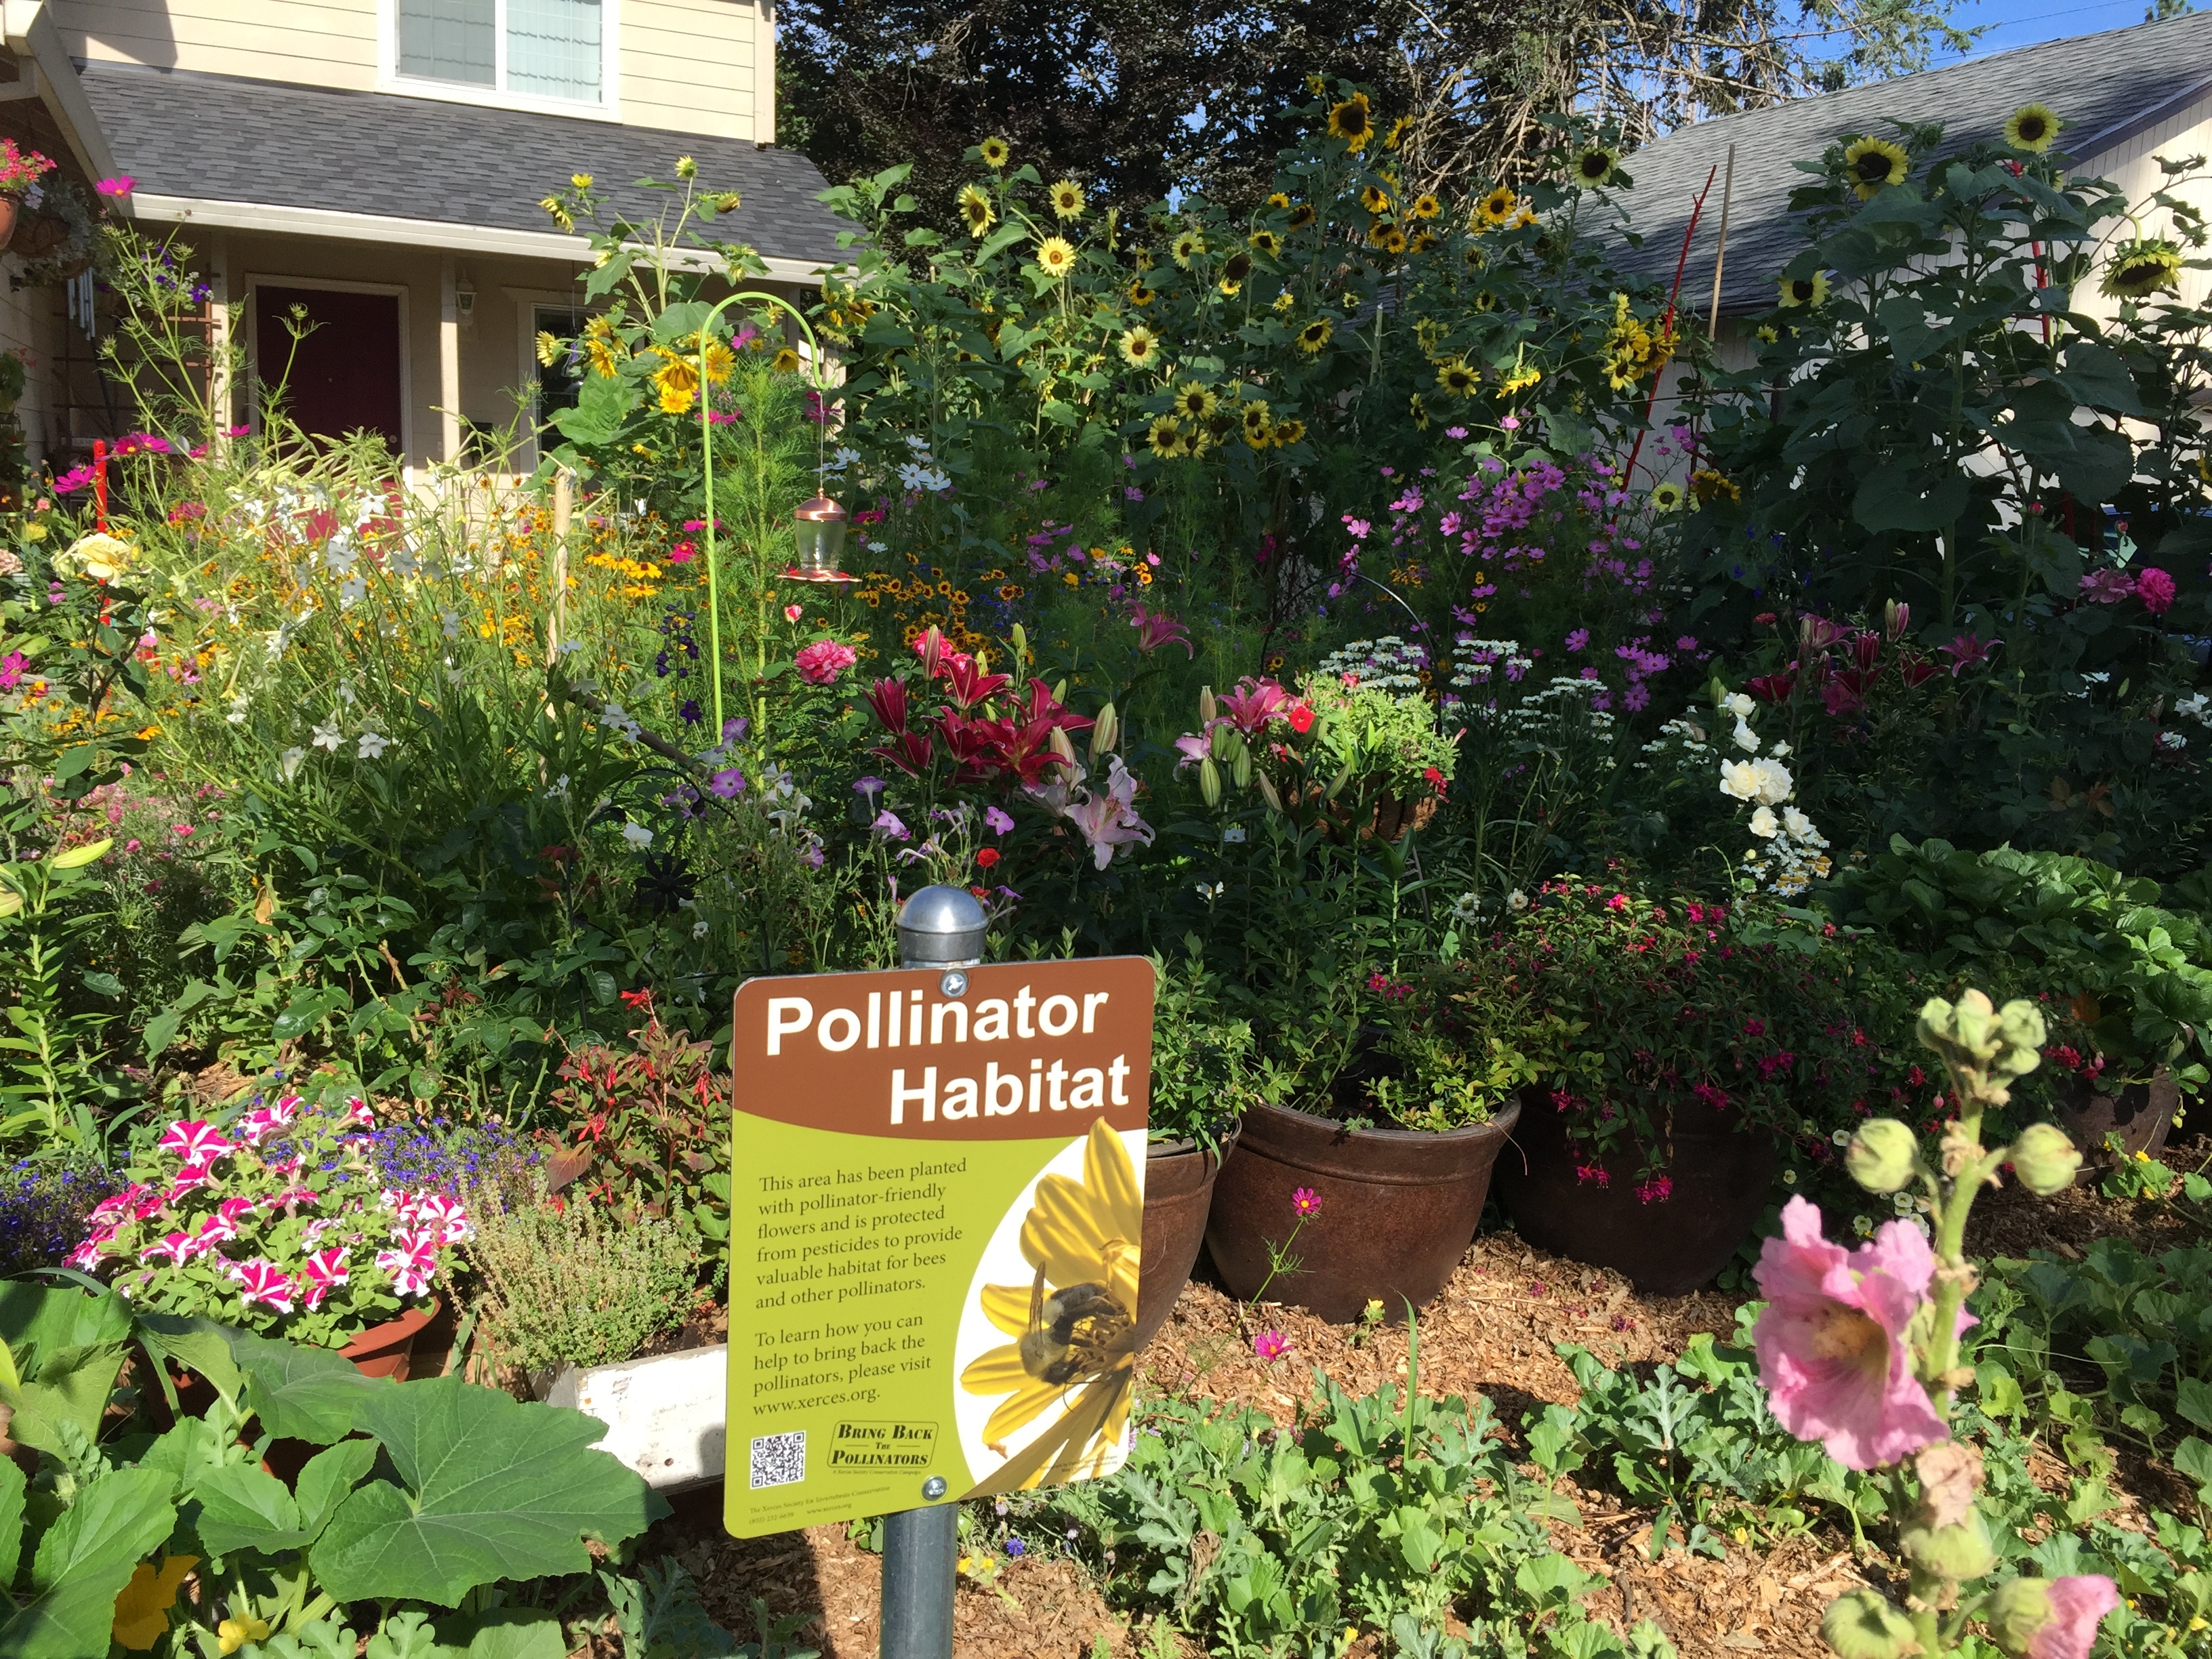 A beautiful, colorful garden is bursting with a variety of blooms. In the foreground is a Xerces Society pollinator habitat sign.